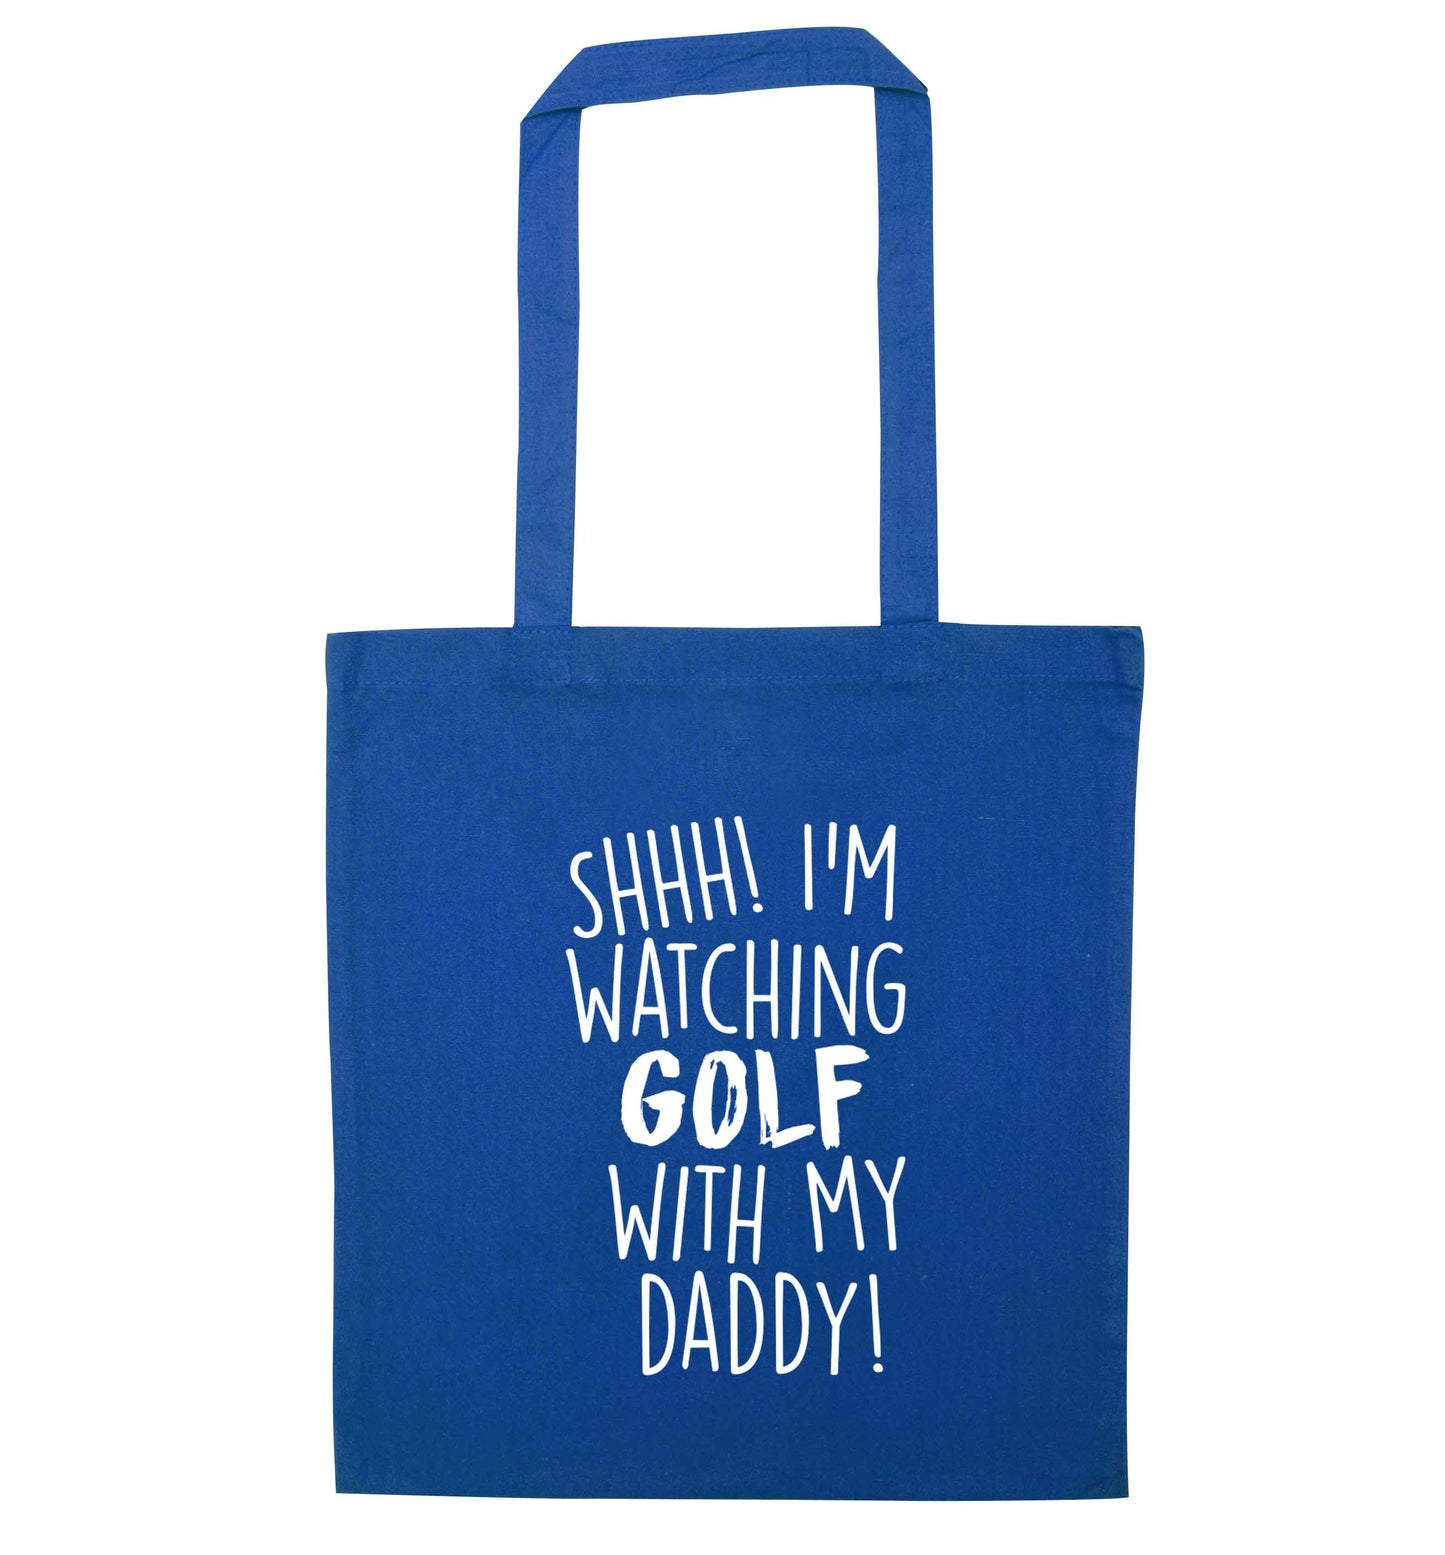 Shh I'm watching golf with my daddy blue tote bag